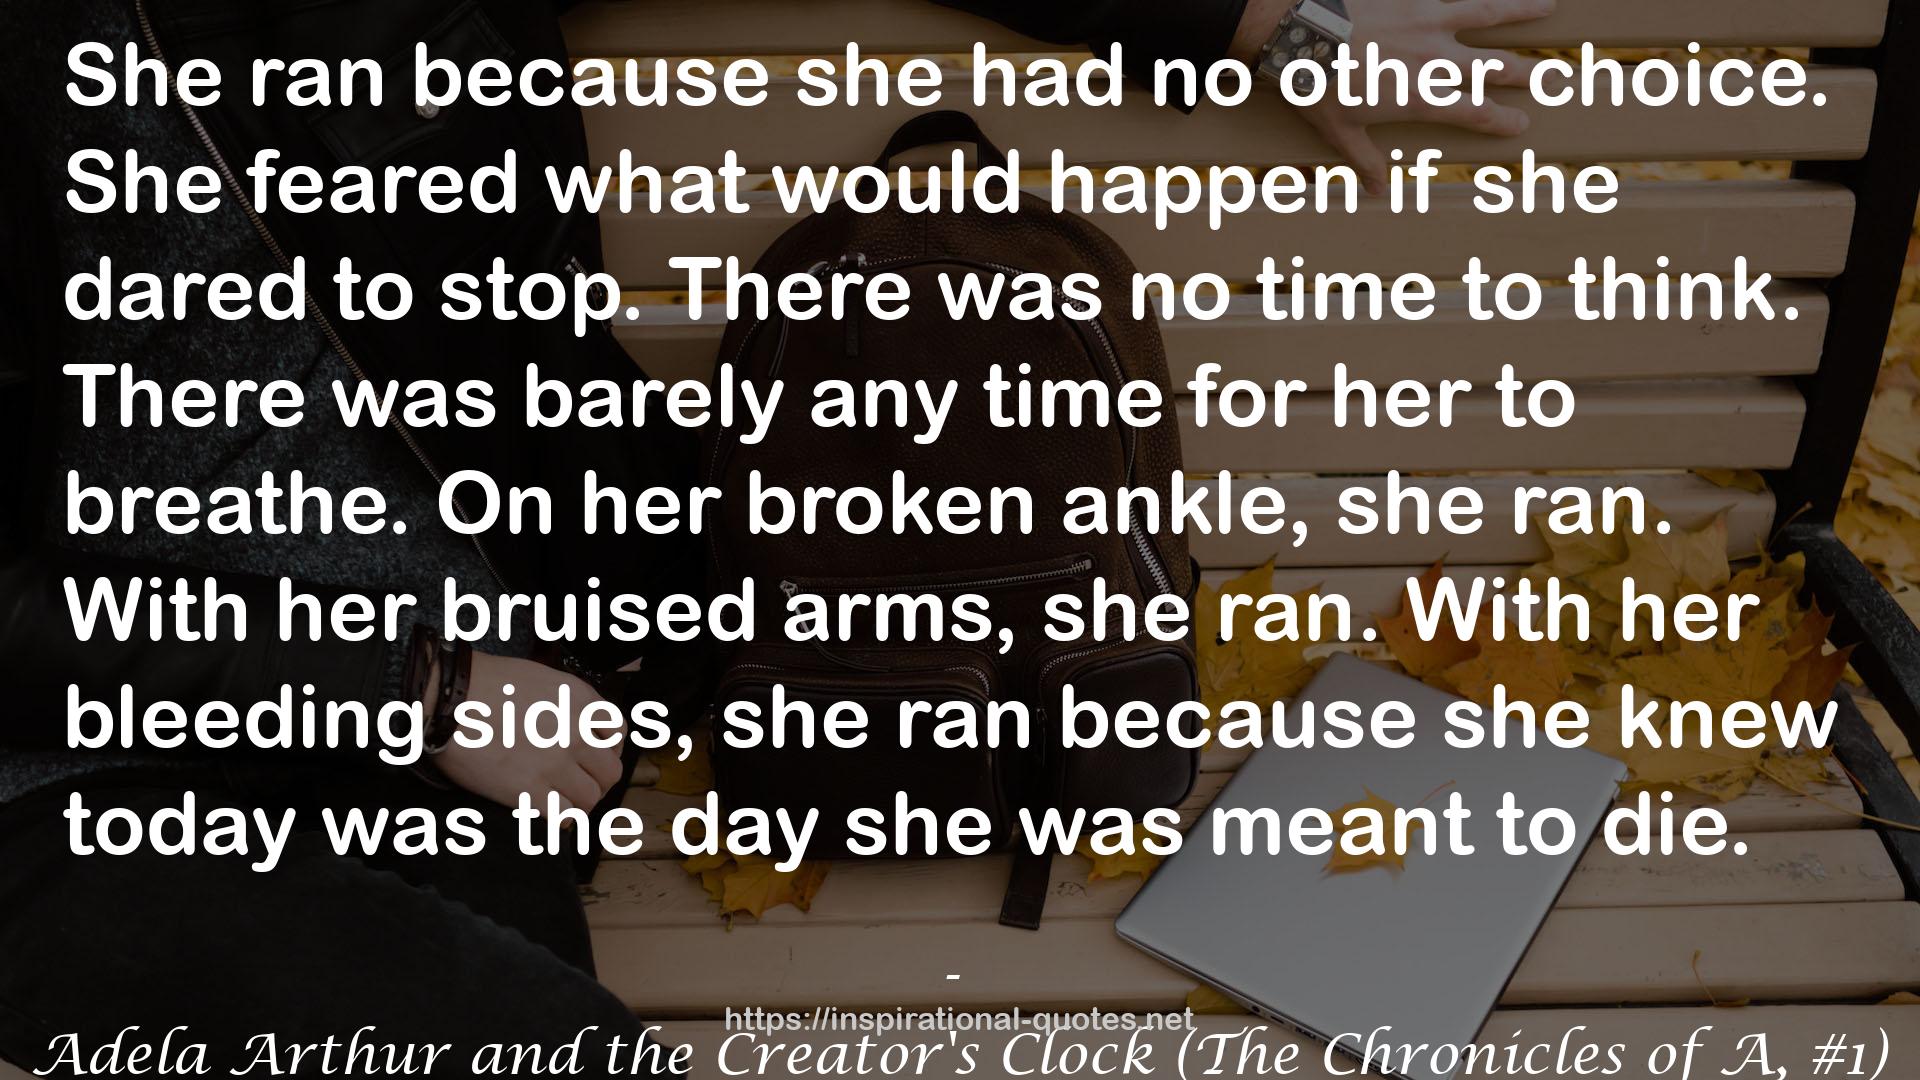 Adela Arthur and the Creator's Clock (The Chronicles of A, #1) QUOTES